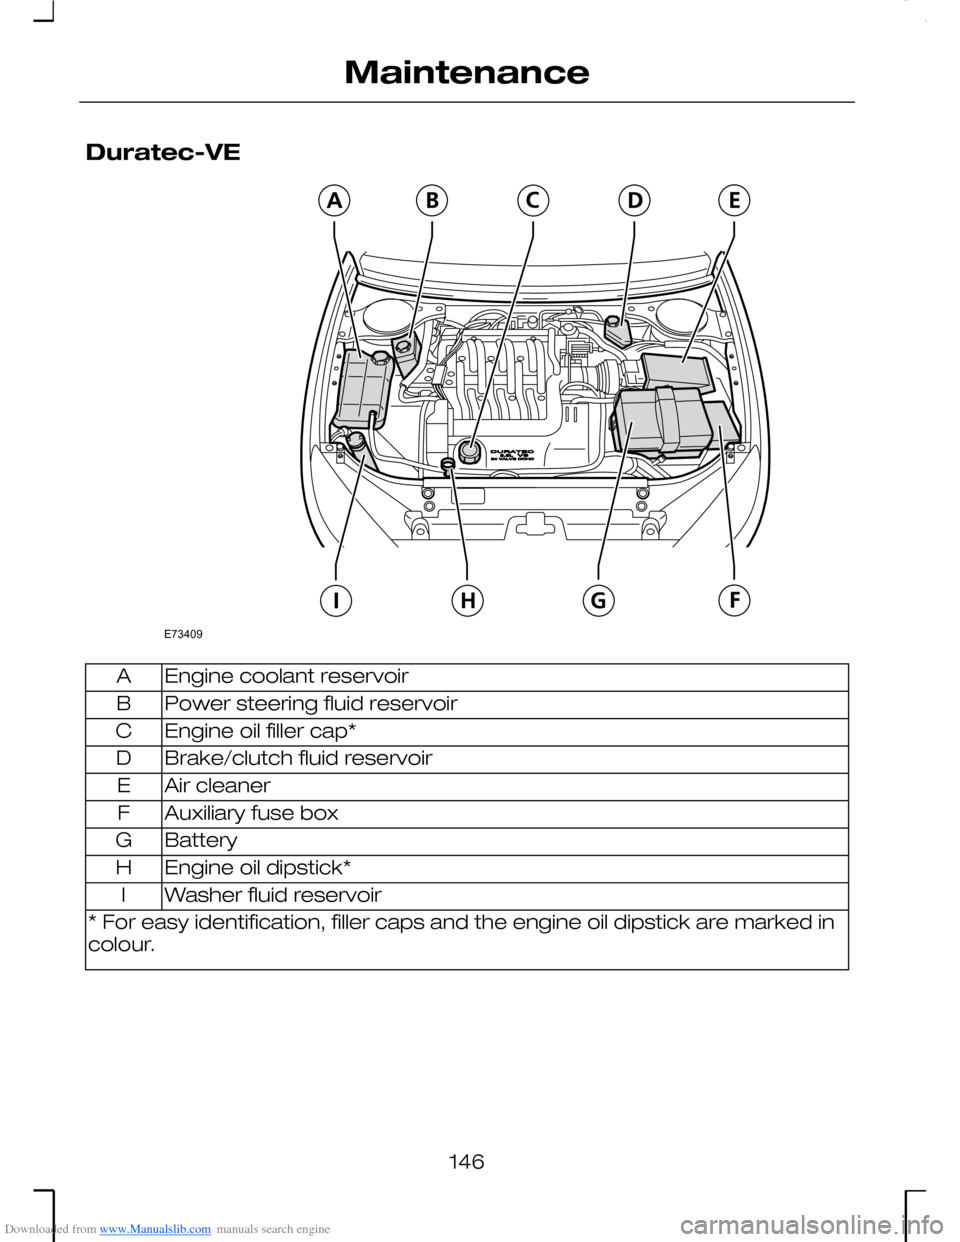 FORD MONDEO 2006 2.G Owners Manual Downloaded from www.Manualslib.com manuals search engine Duratec-VE
Engine coolant reservoirA
Power steering fluid reservoirB
Engine oil filler cap*C
Brake/clutch fluid reservoirD
Air cleanerE
Auxilia